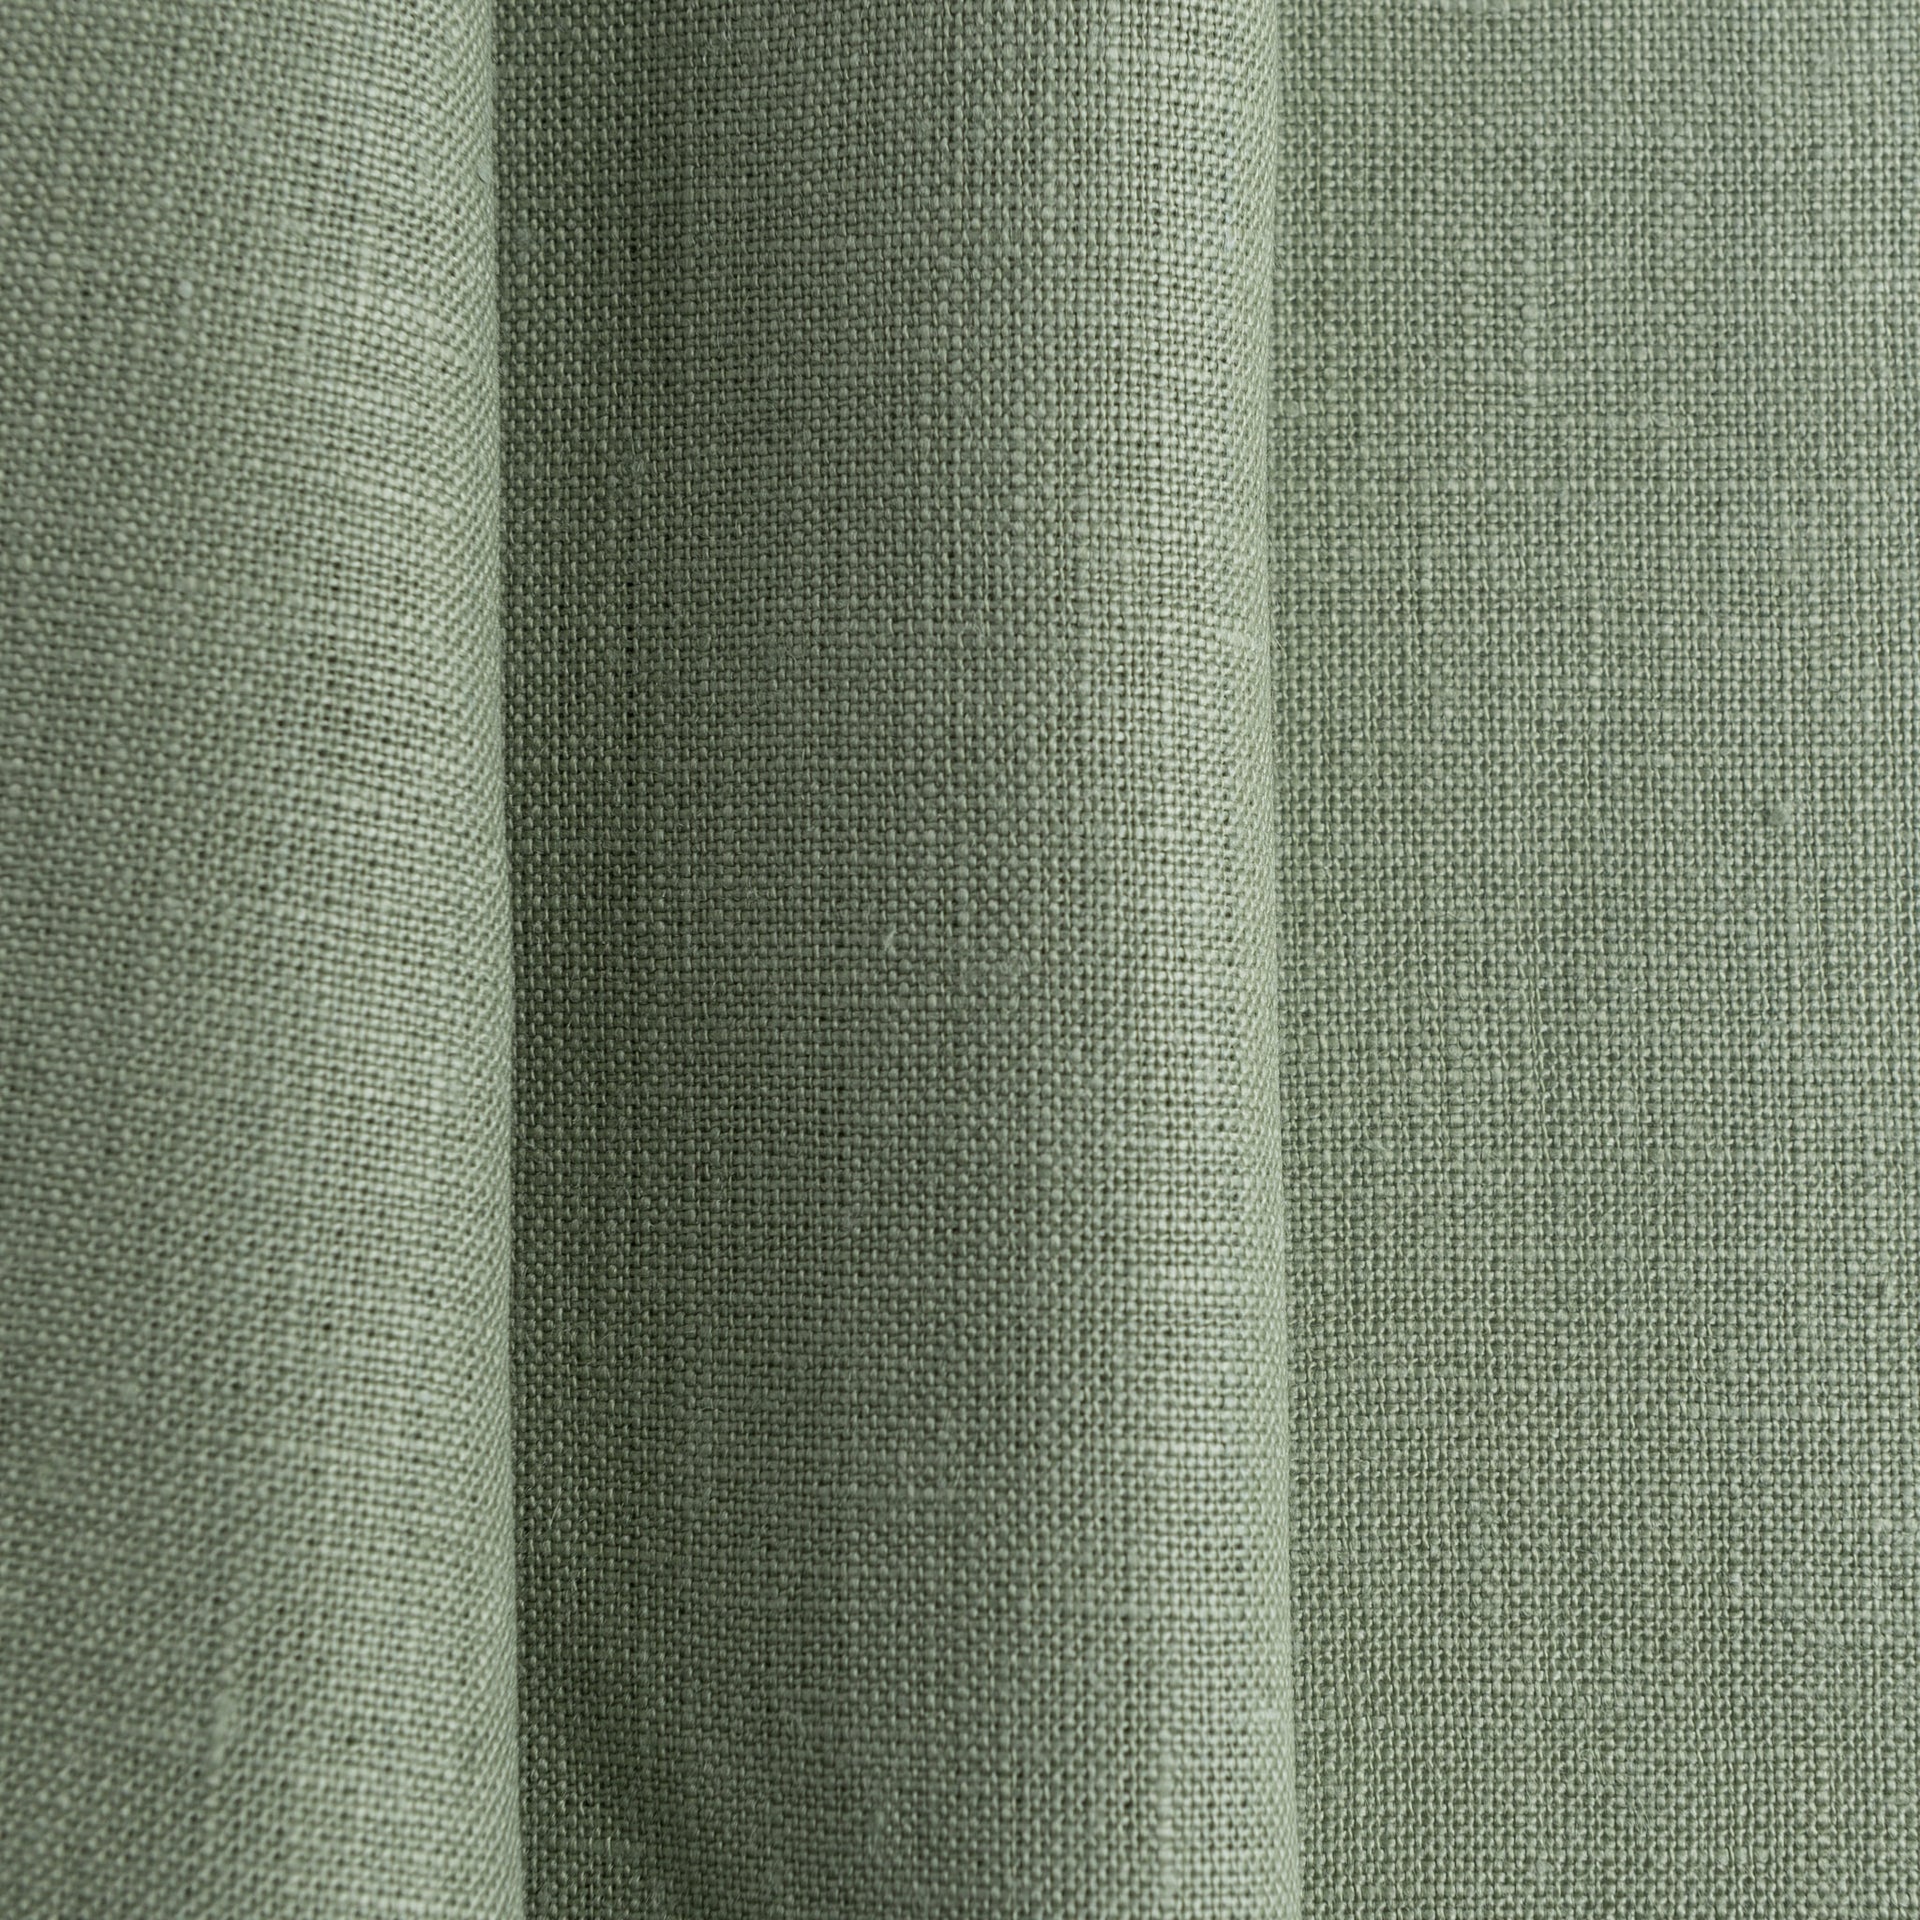 Green Linen Back Tab Curtain With Cotton Lining, Color: Asparagus